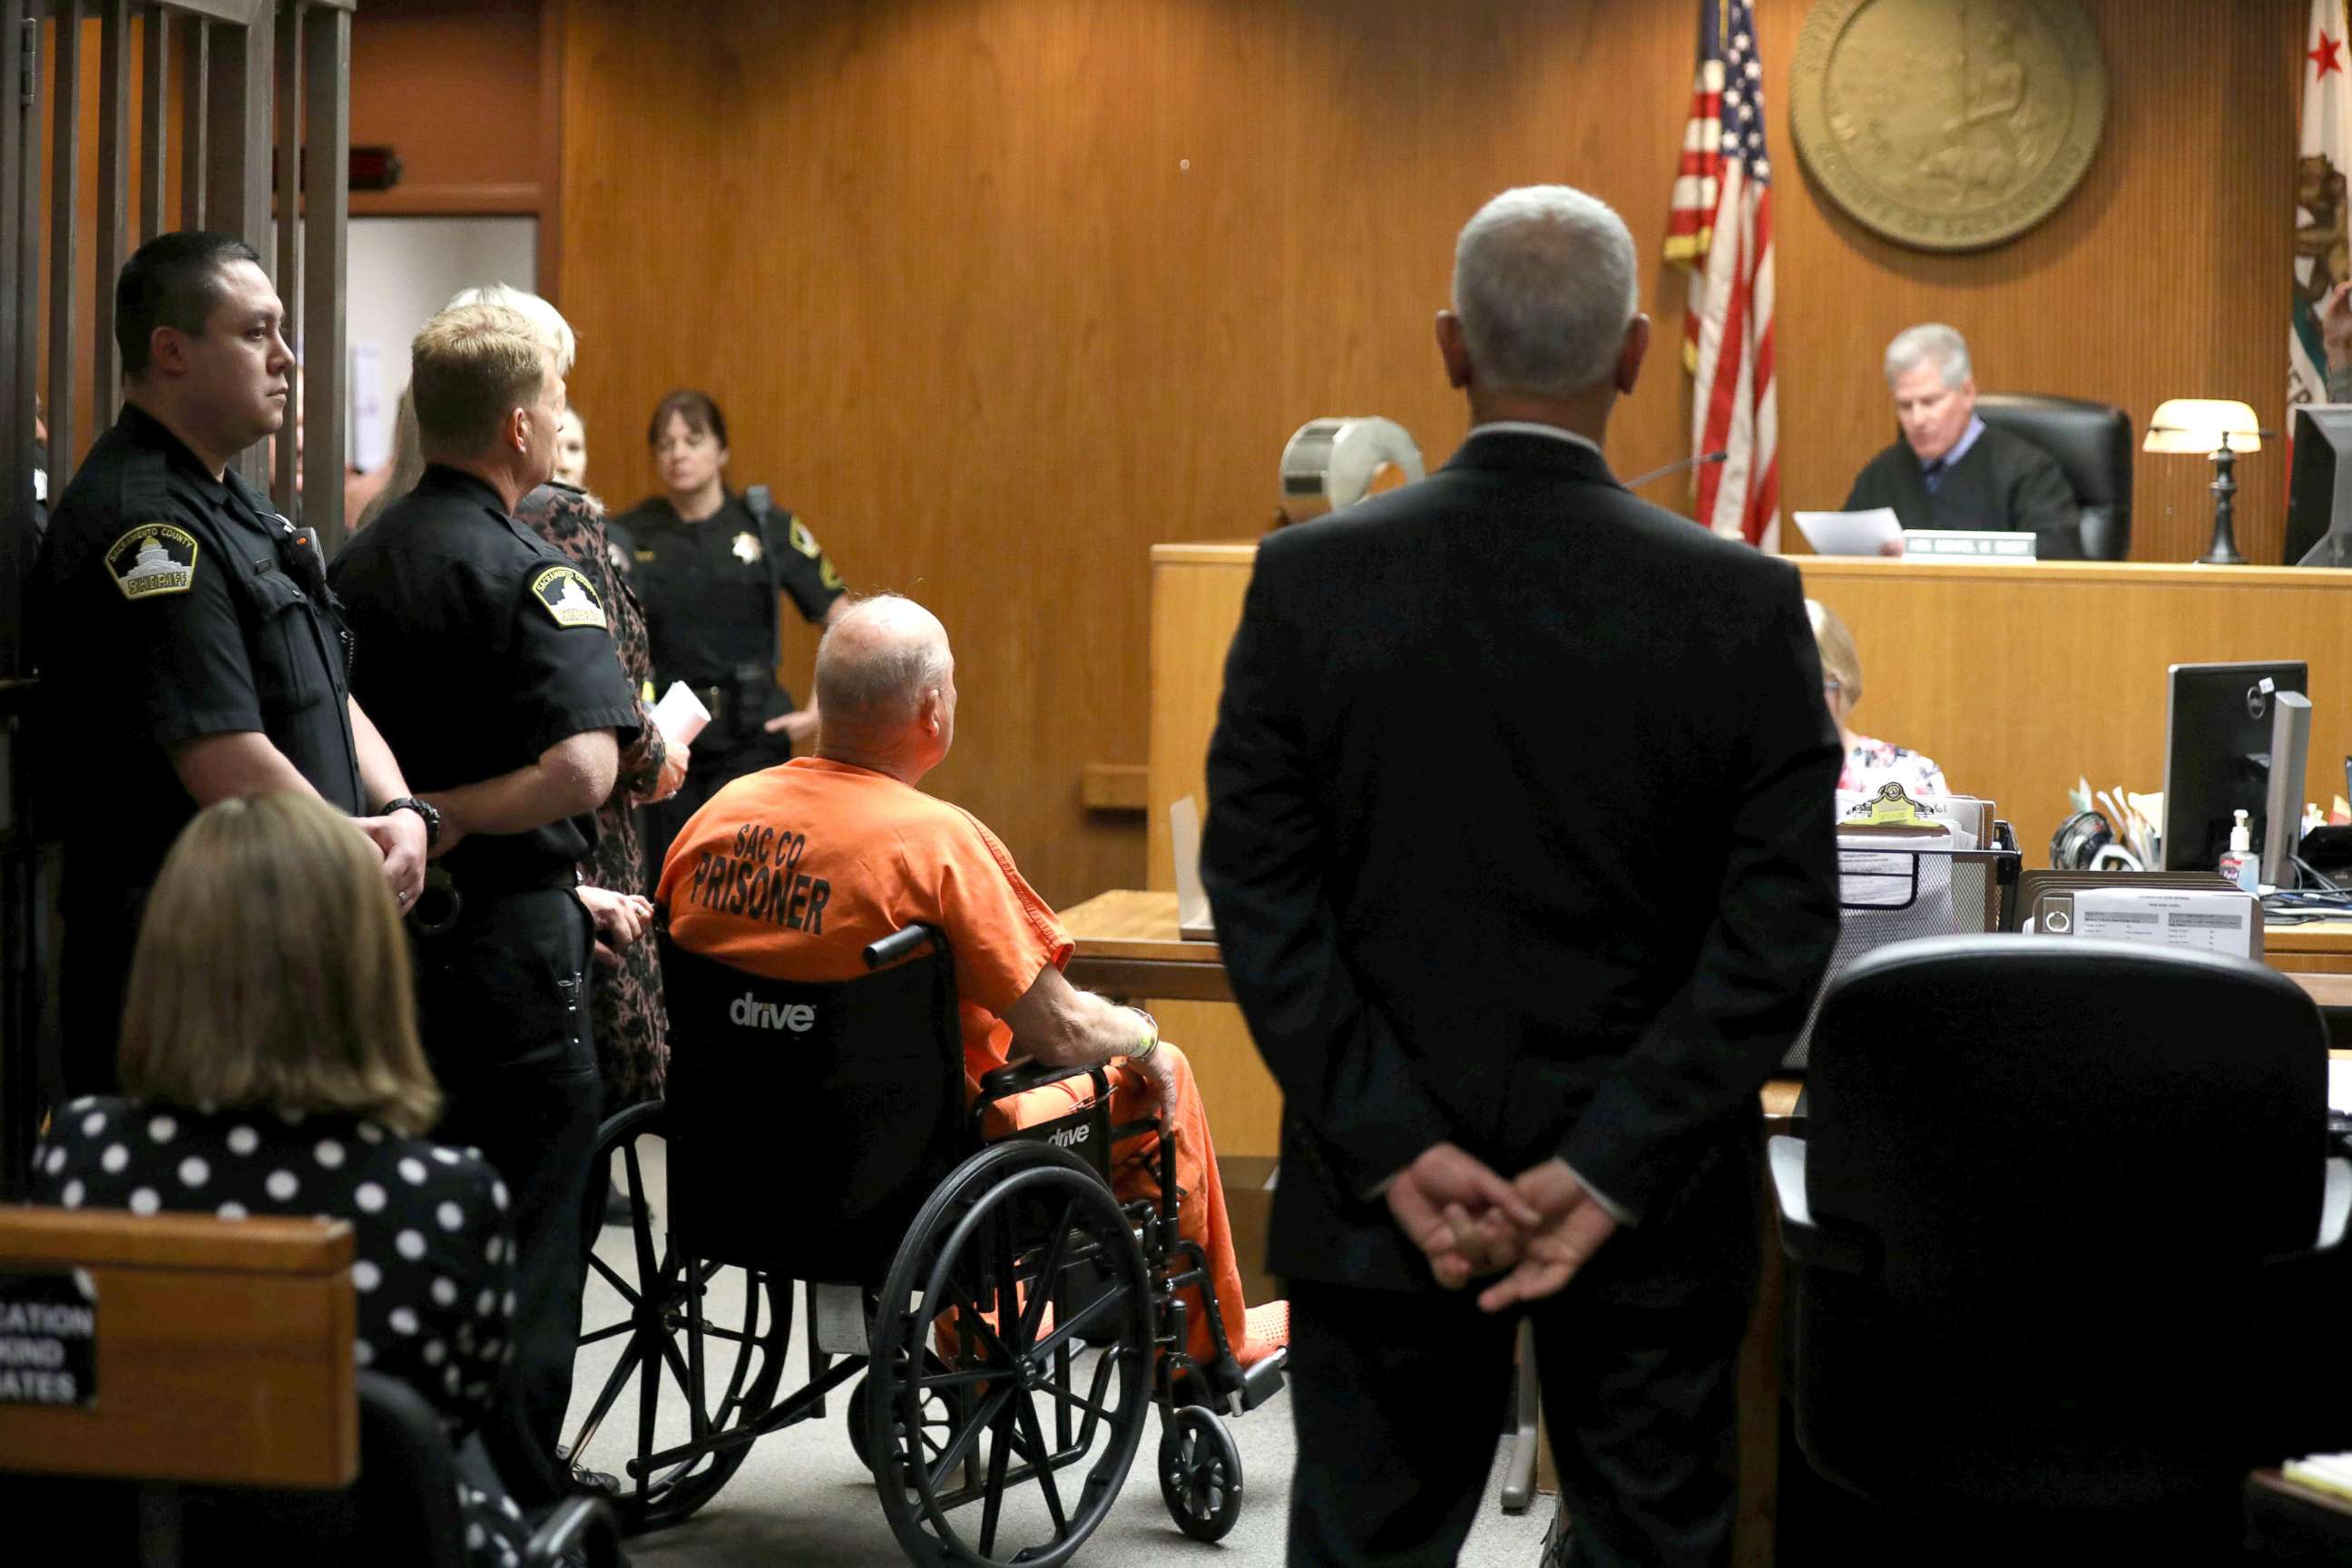 PHOTO: Joseph James DeAngelo, 72, who authorities said was identified by DNA evidence as the serial predator dubbed the Golden State Killer, appears in a wheelchair  at his arraignment in California Superior court in Sacramento, Calif., April 27, 2018.